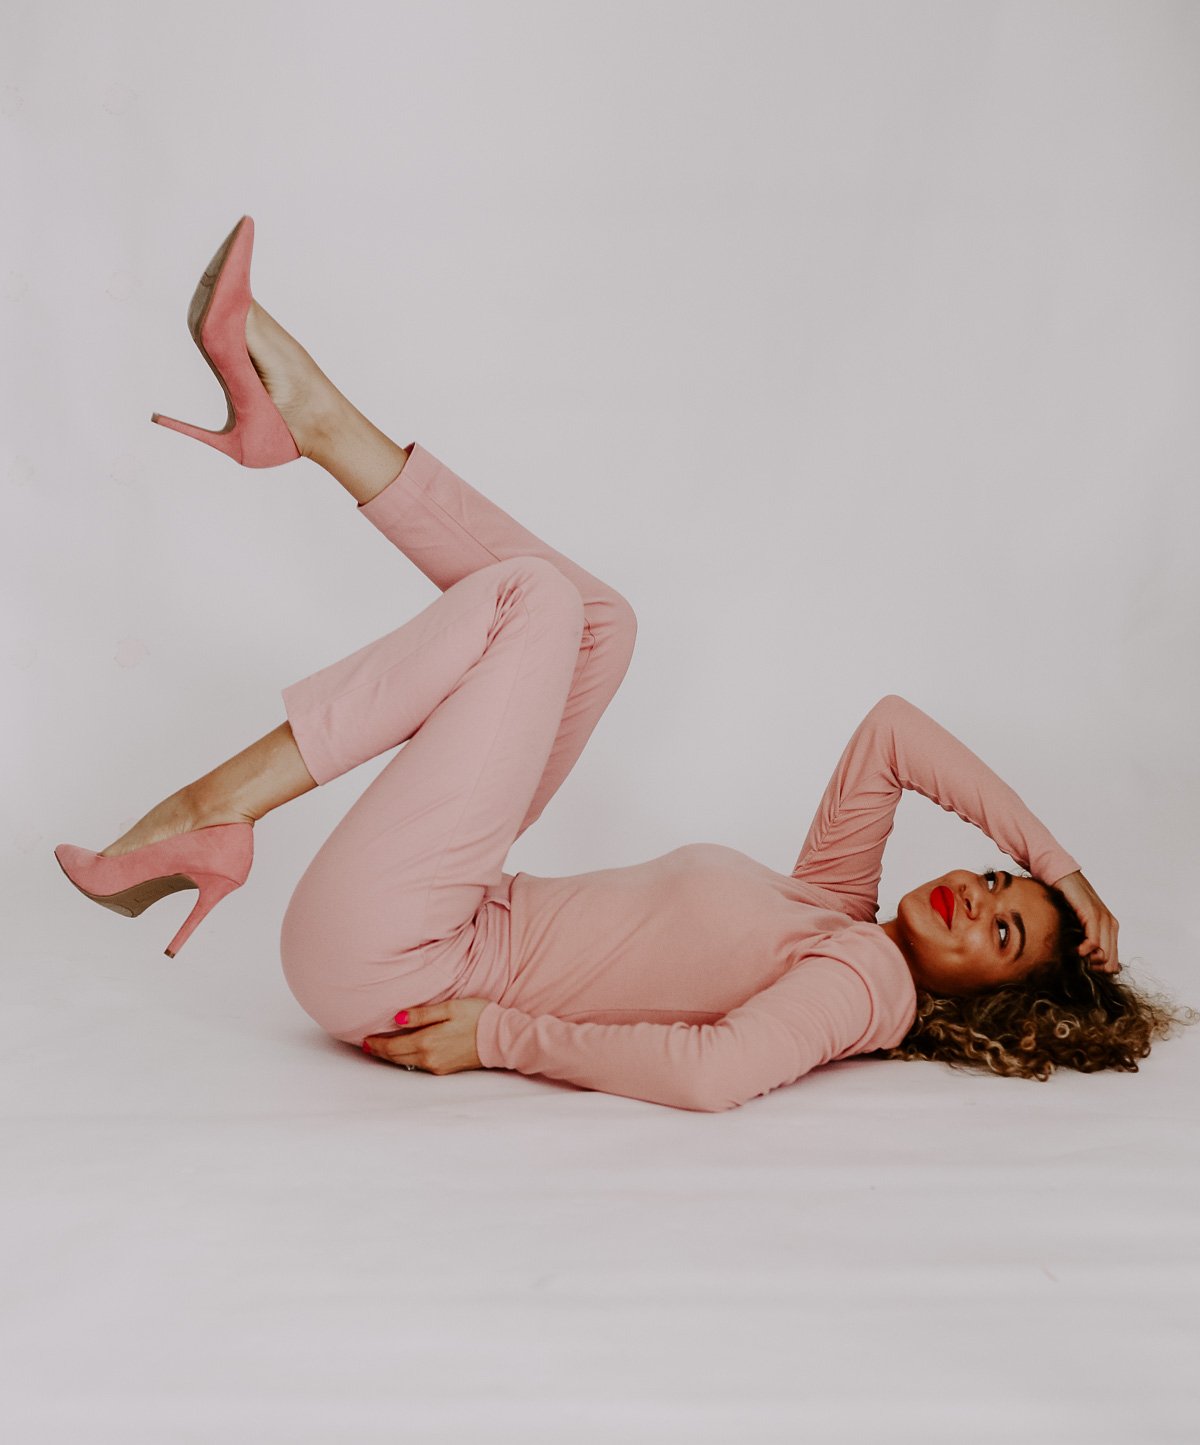 This all millennial pink outfit is perfect for Valentines Day or its a great spring outfit idea too!